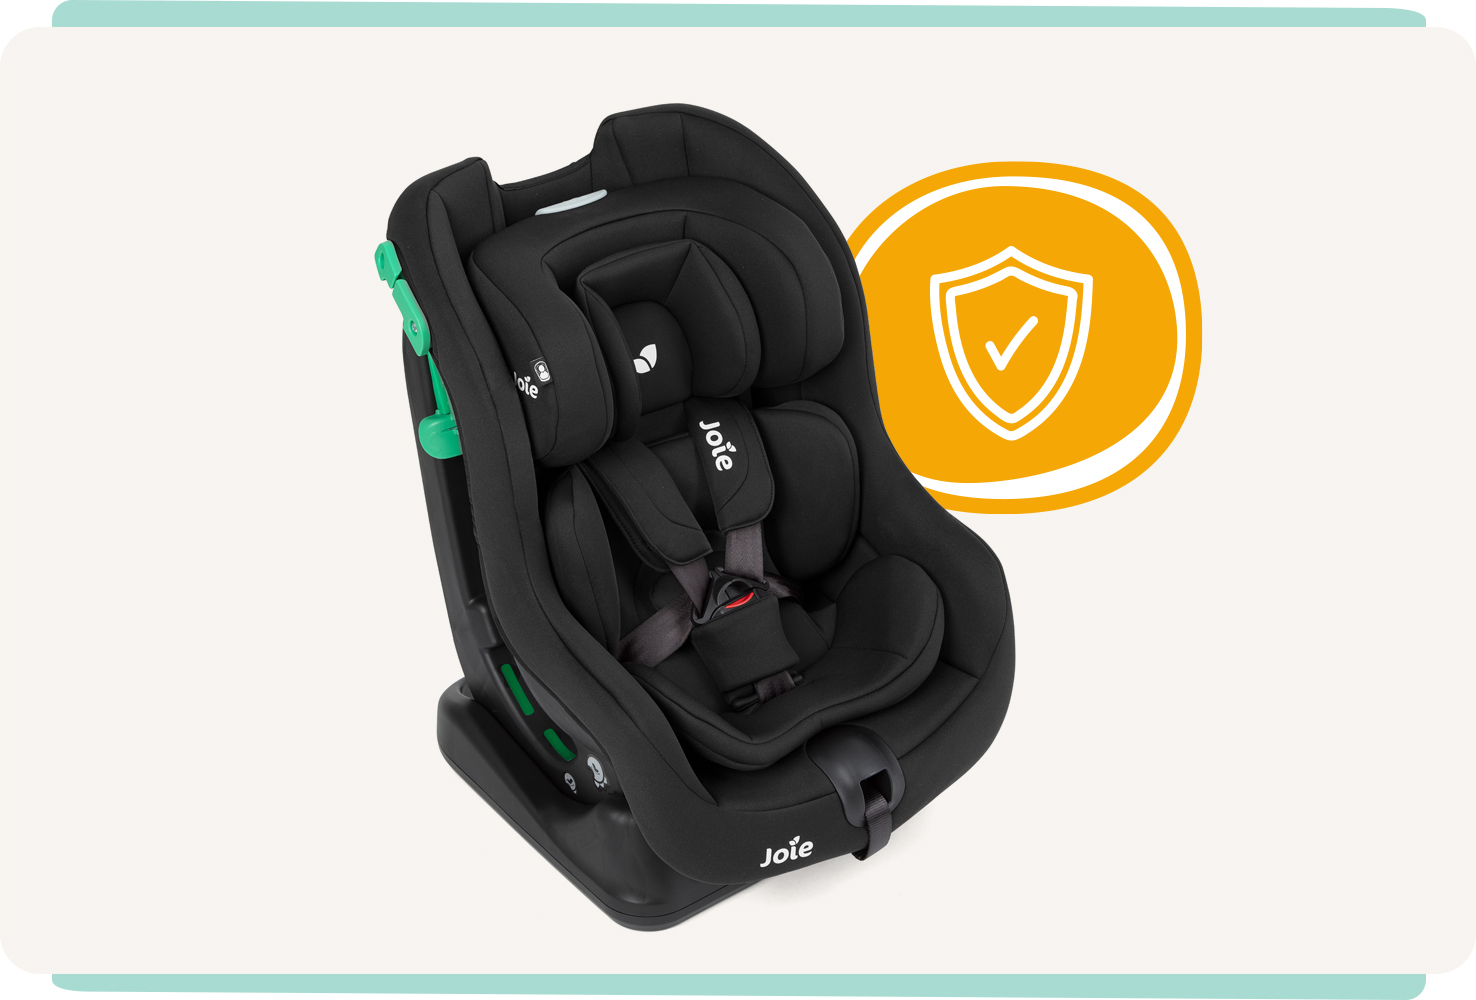 Joie Steadi R129 car seat with harness clipped in with a black colour, at an angle facing to the right with orange circle around a check mark on the right-side of car seat. 